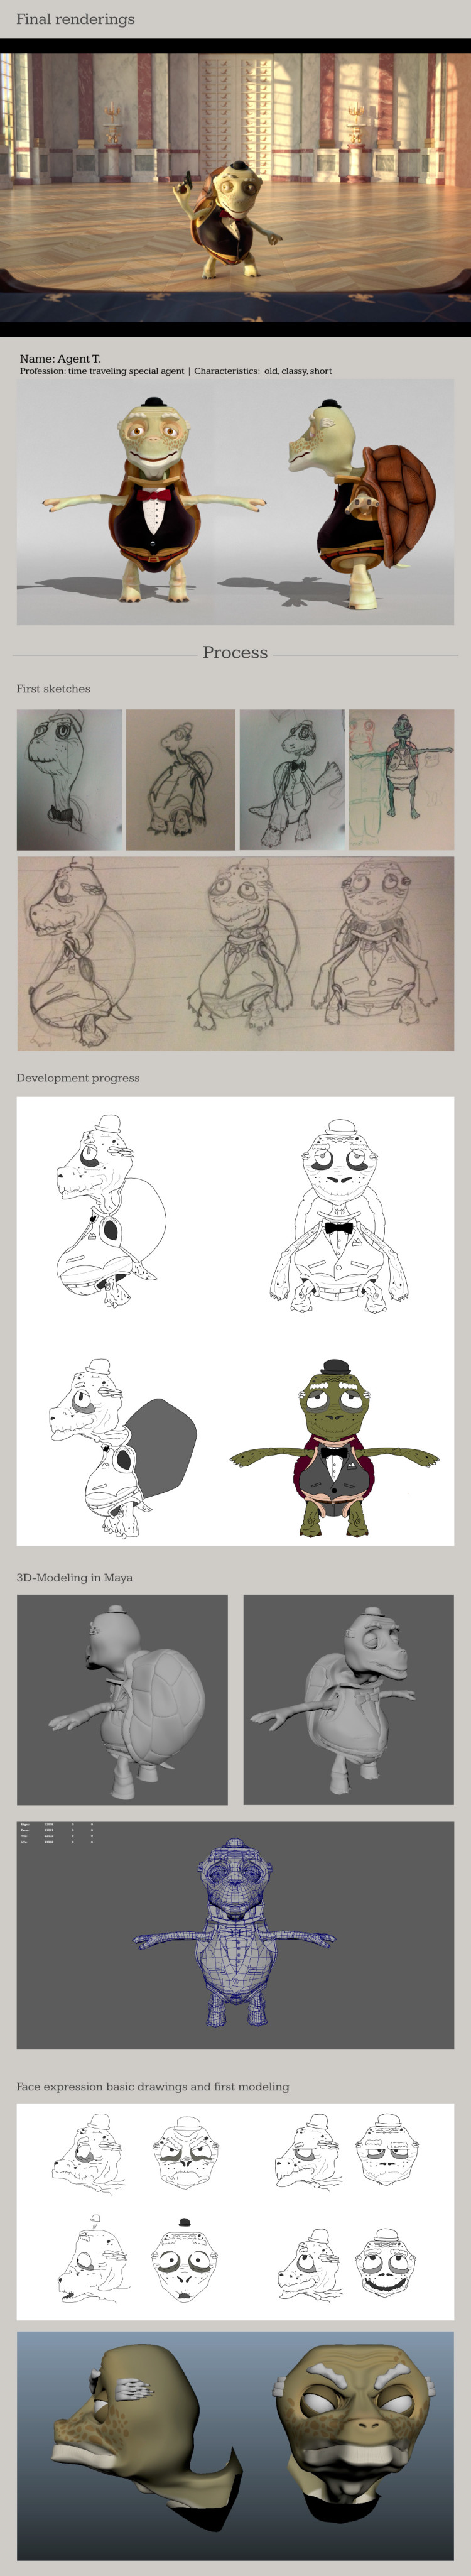 Character Design develompent and modeling for an animated short movie